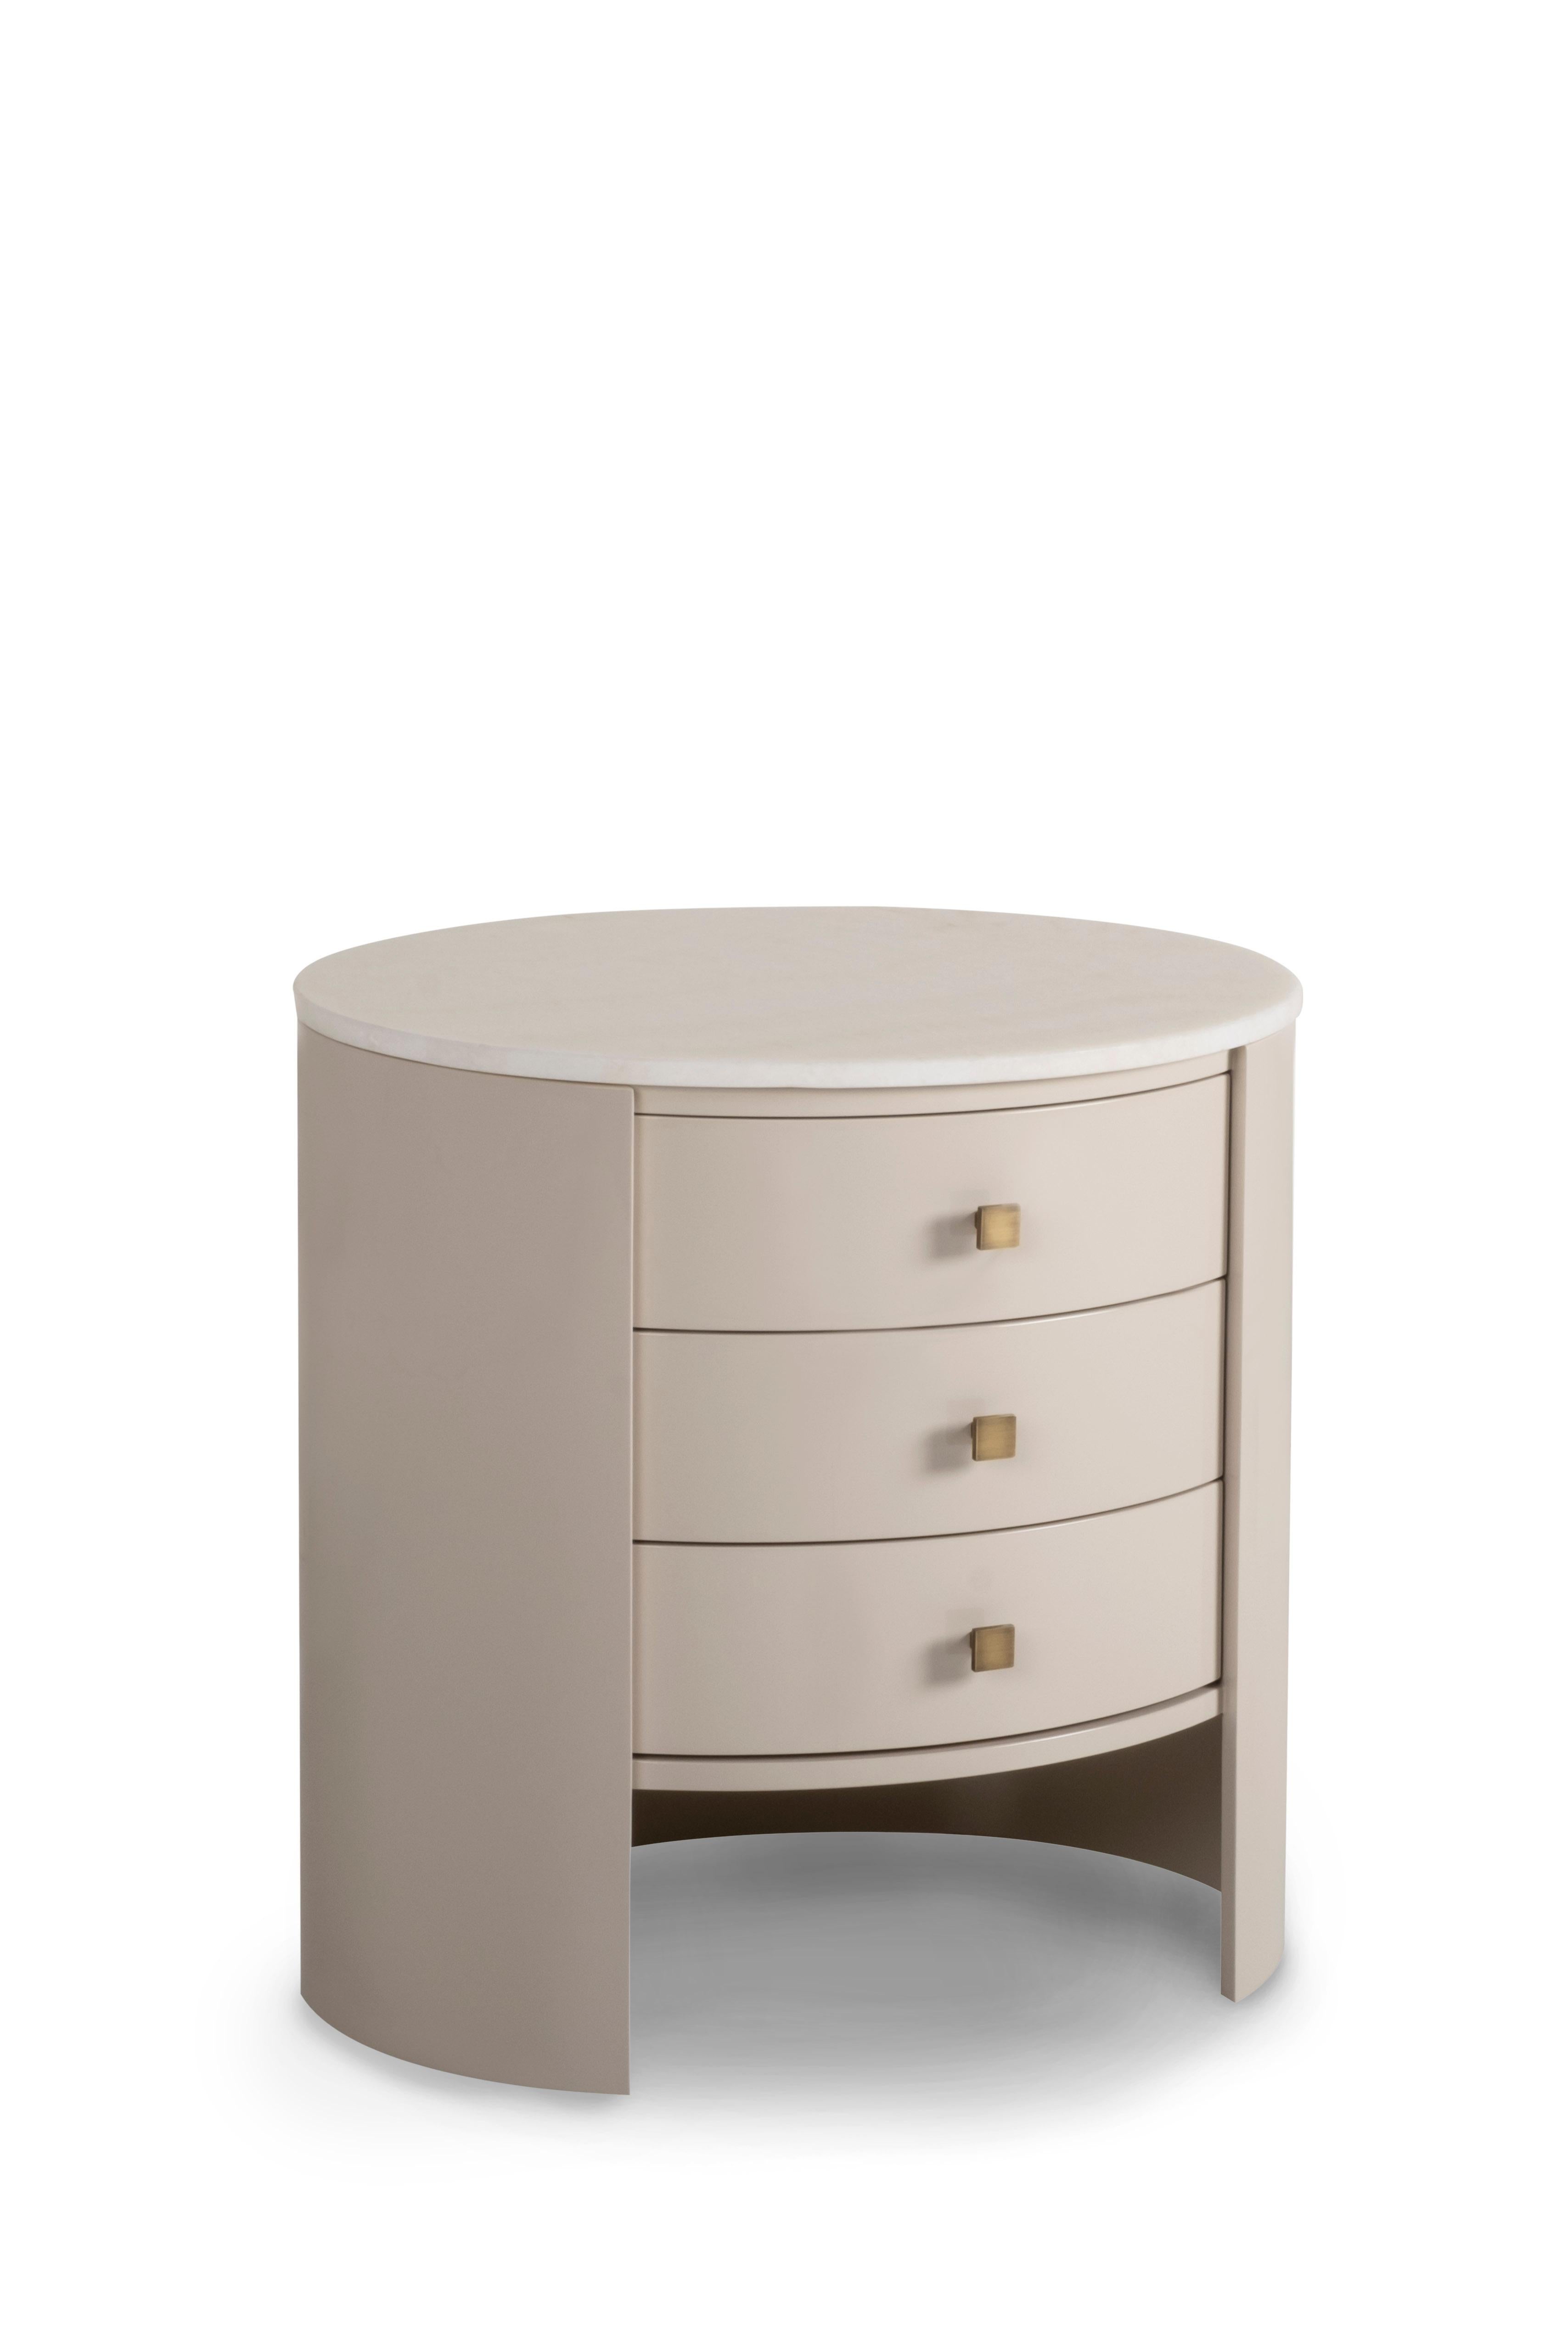 oval nightstand with drawers